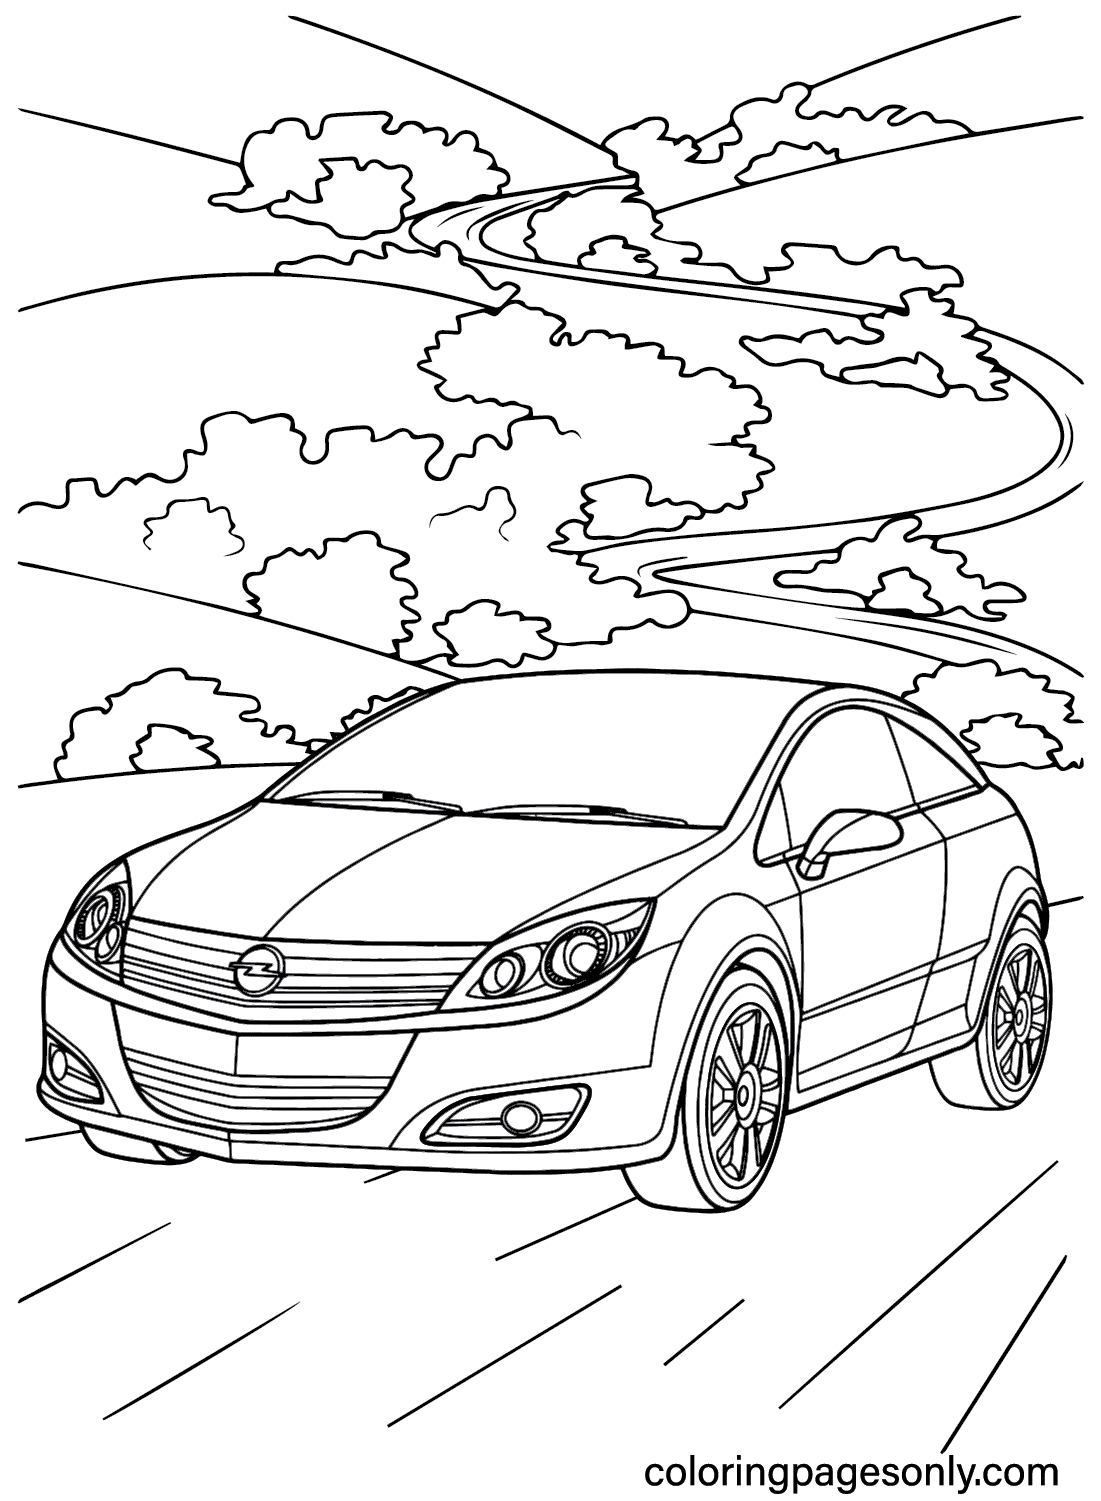 Opel Astra GTC Coloring Page from Opel